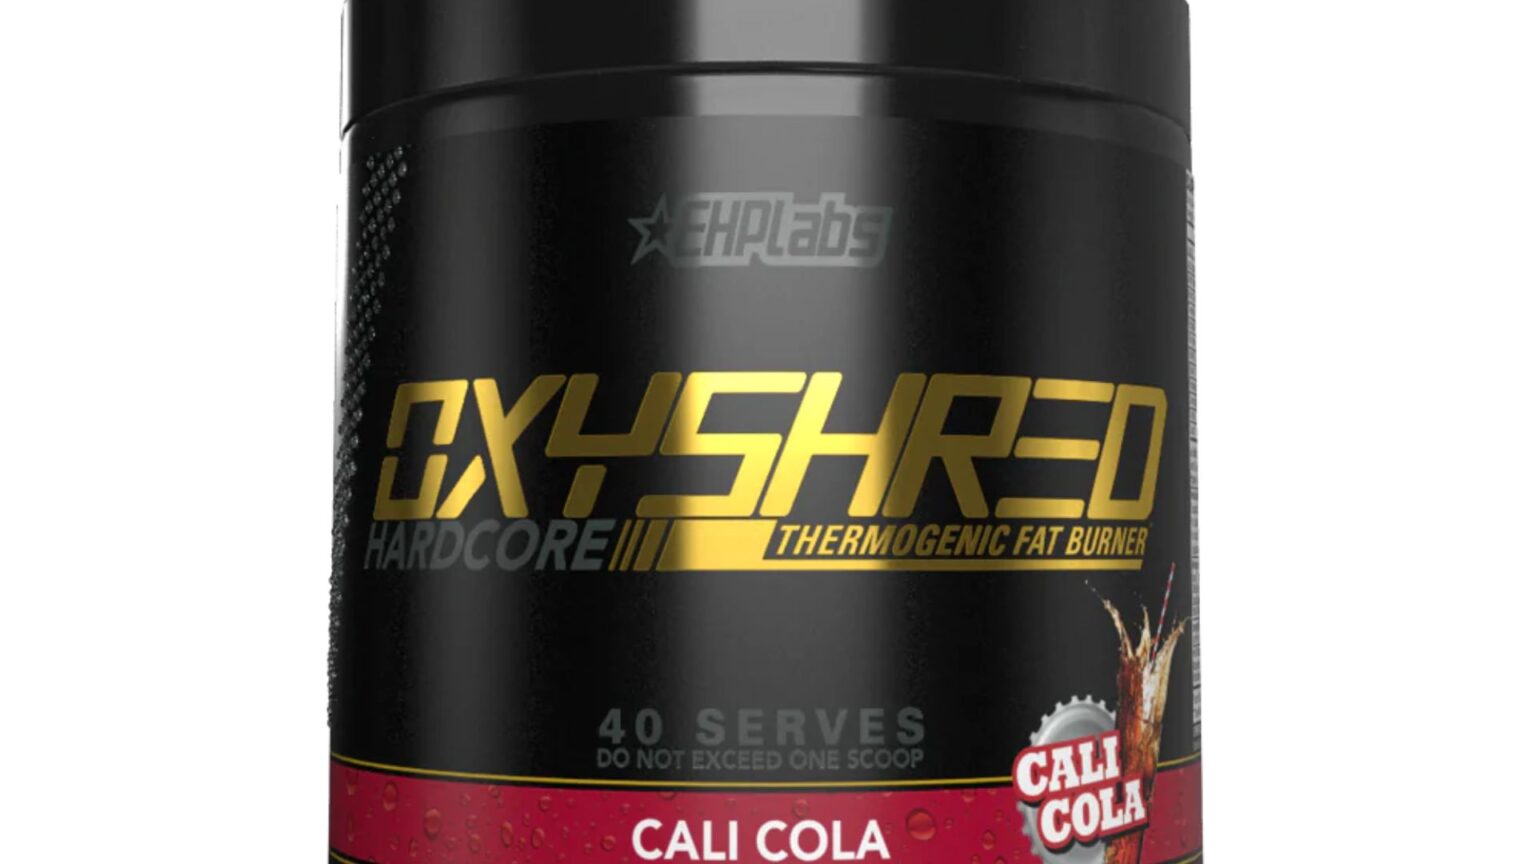 Why is Oxyshred the best thermogenic?